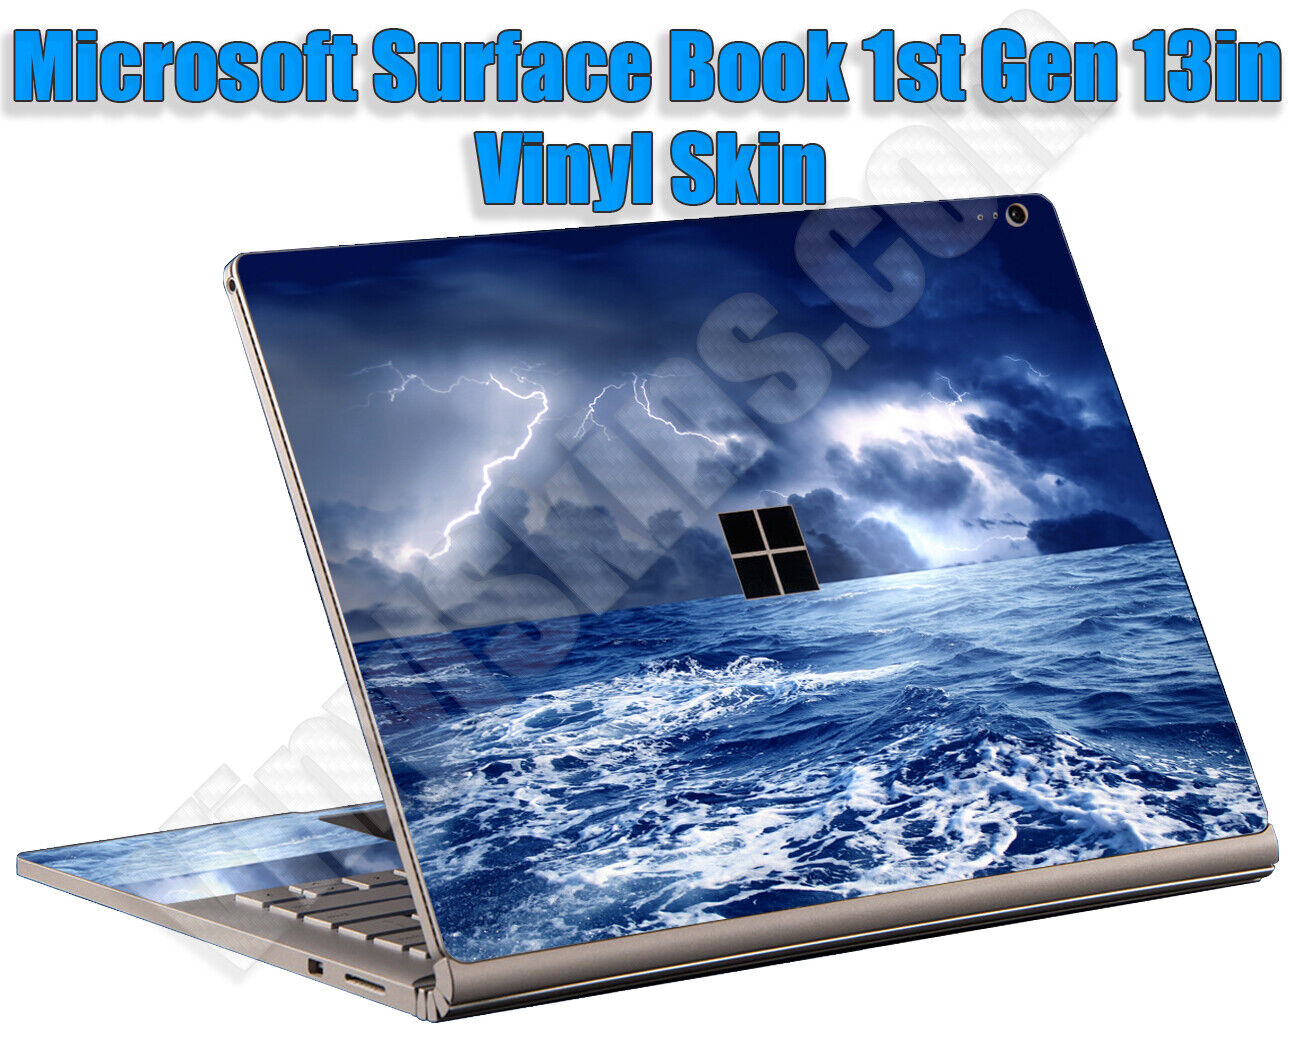 Any 1 Vinyl Sticker/Skin for Microsoft Surface Book 1st Gen. - Free US Shipping